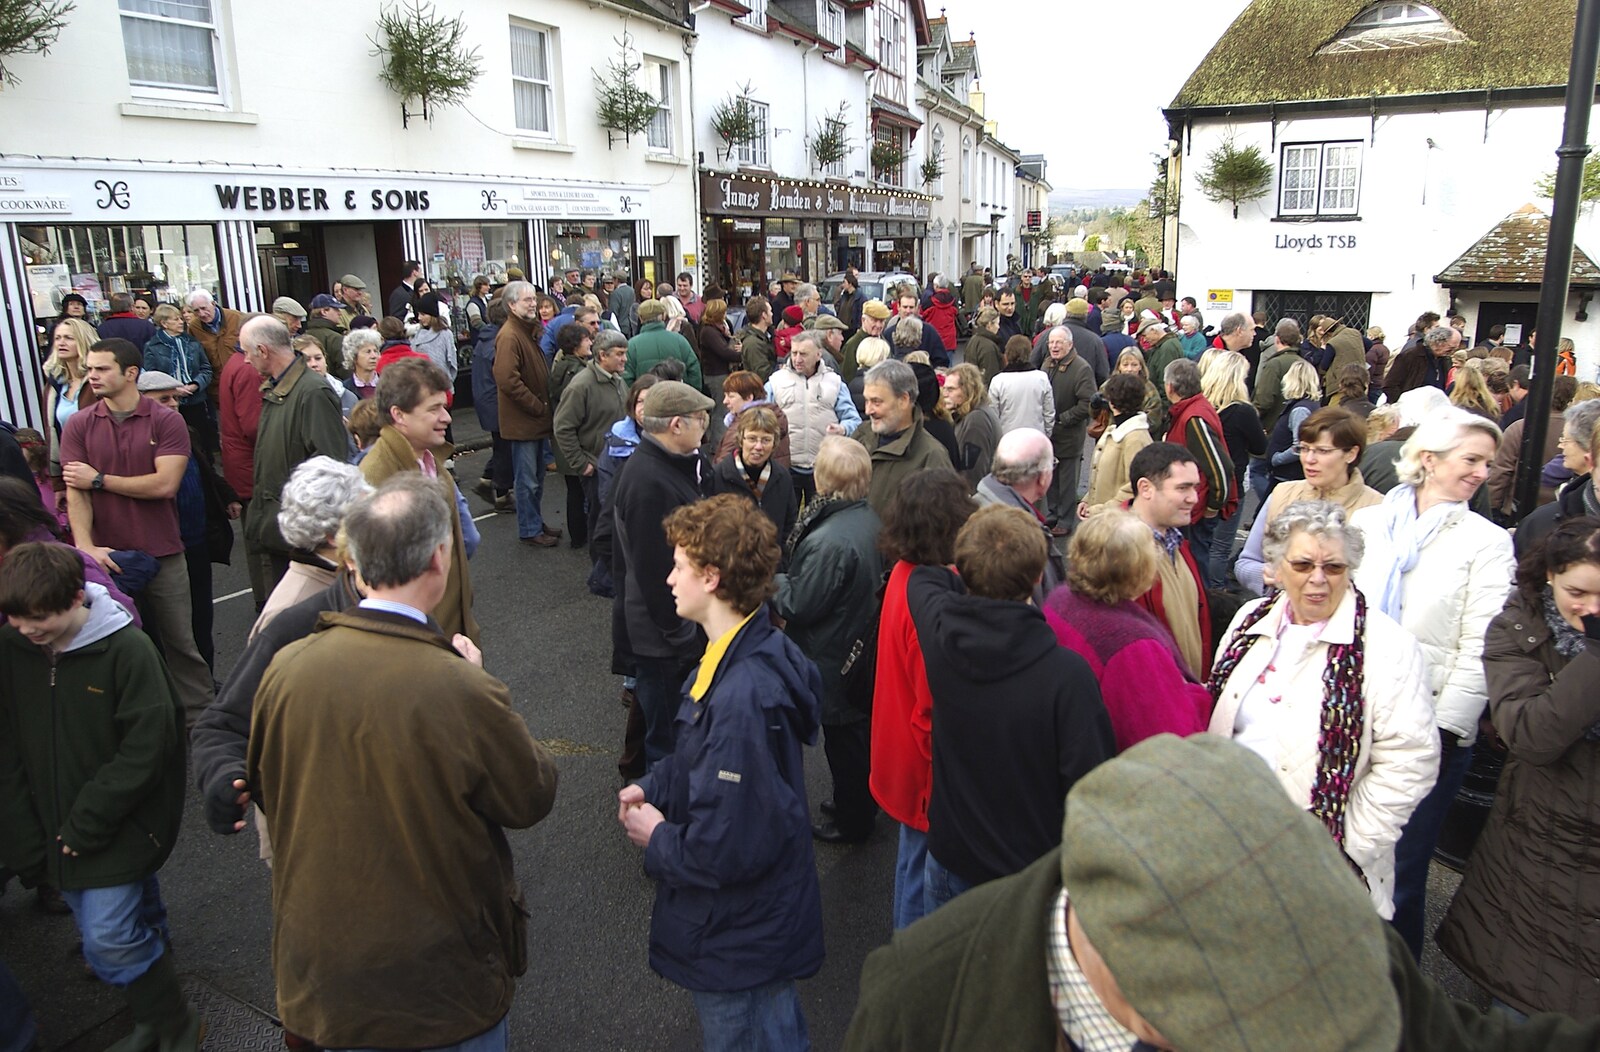 The remaining crowds throng Chagford from A Boxing Day Hunt, Chagford, Devon - 26th December 2007